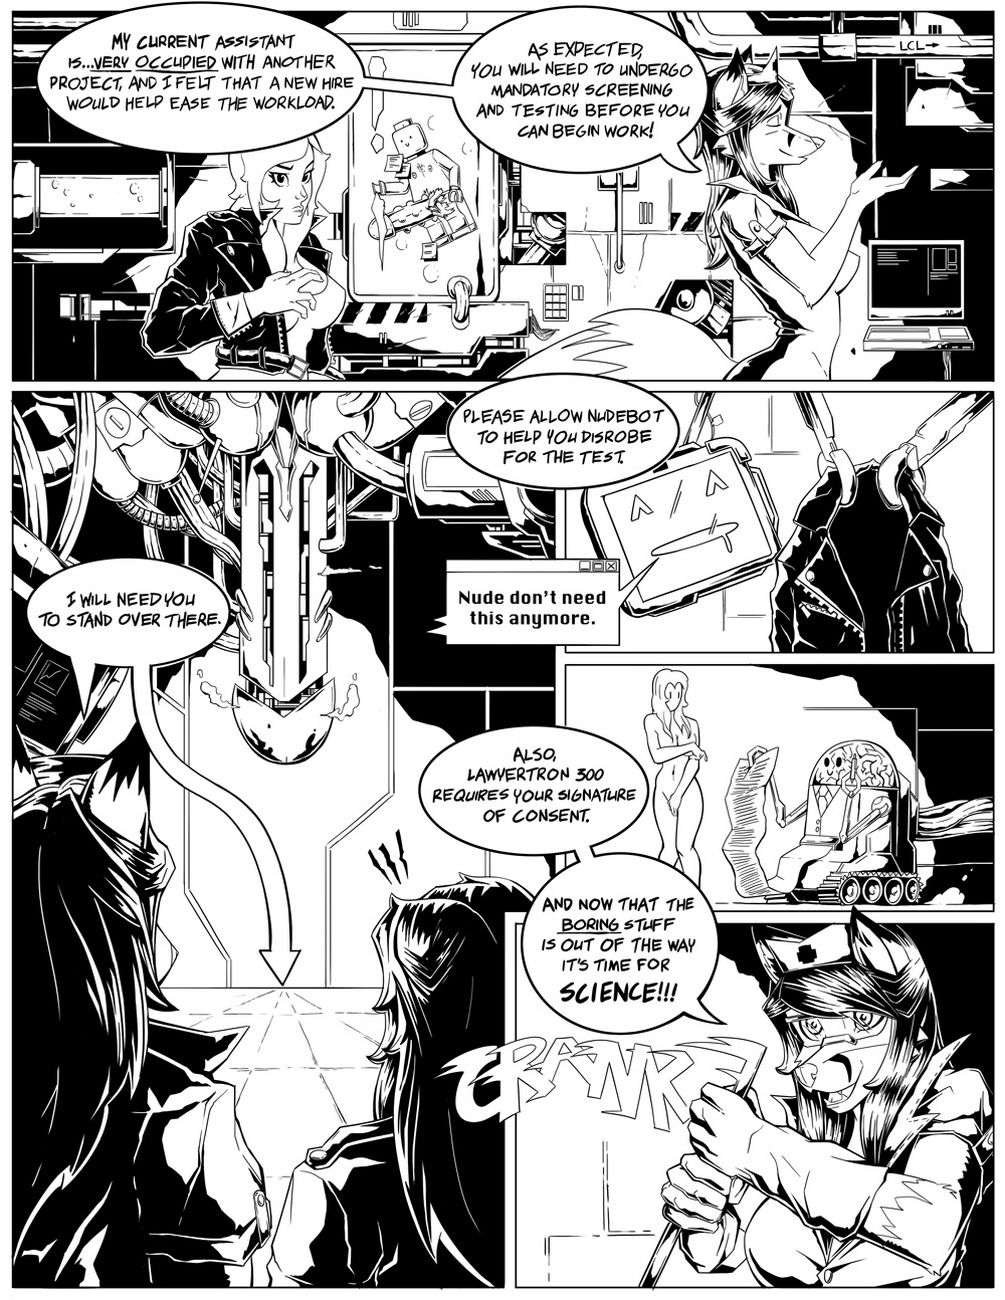 Slick Science page 3